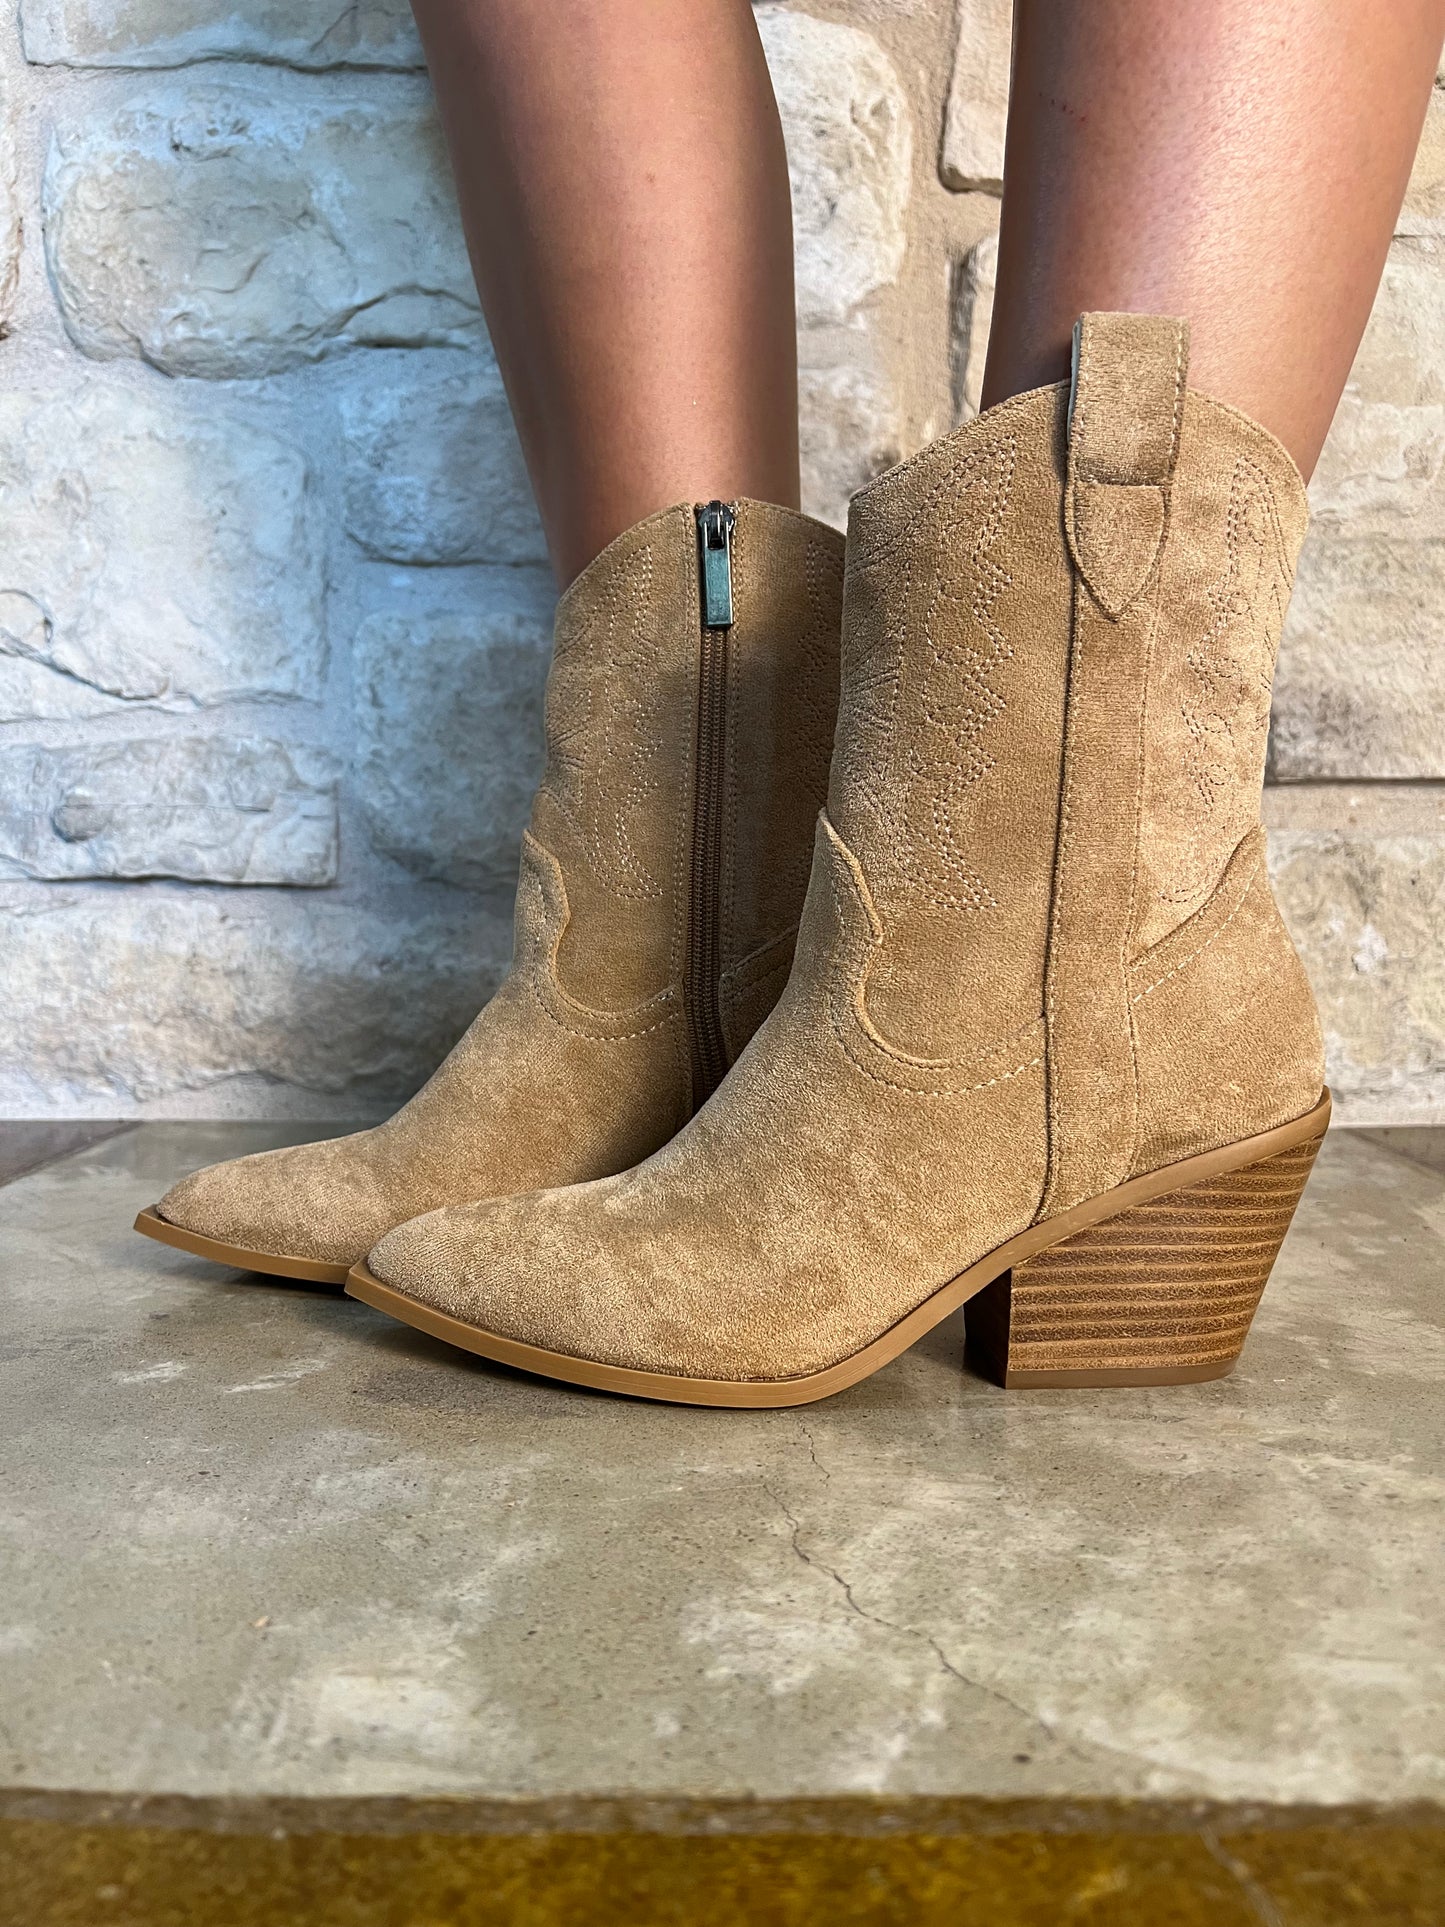 Rowdy Camel Suede Short Boots x Corkys